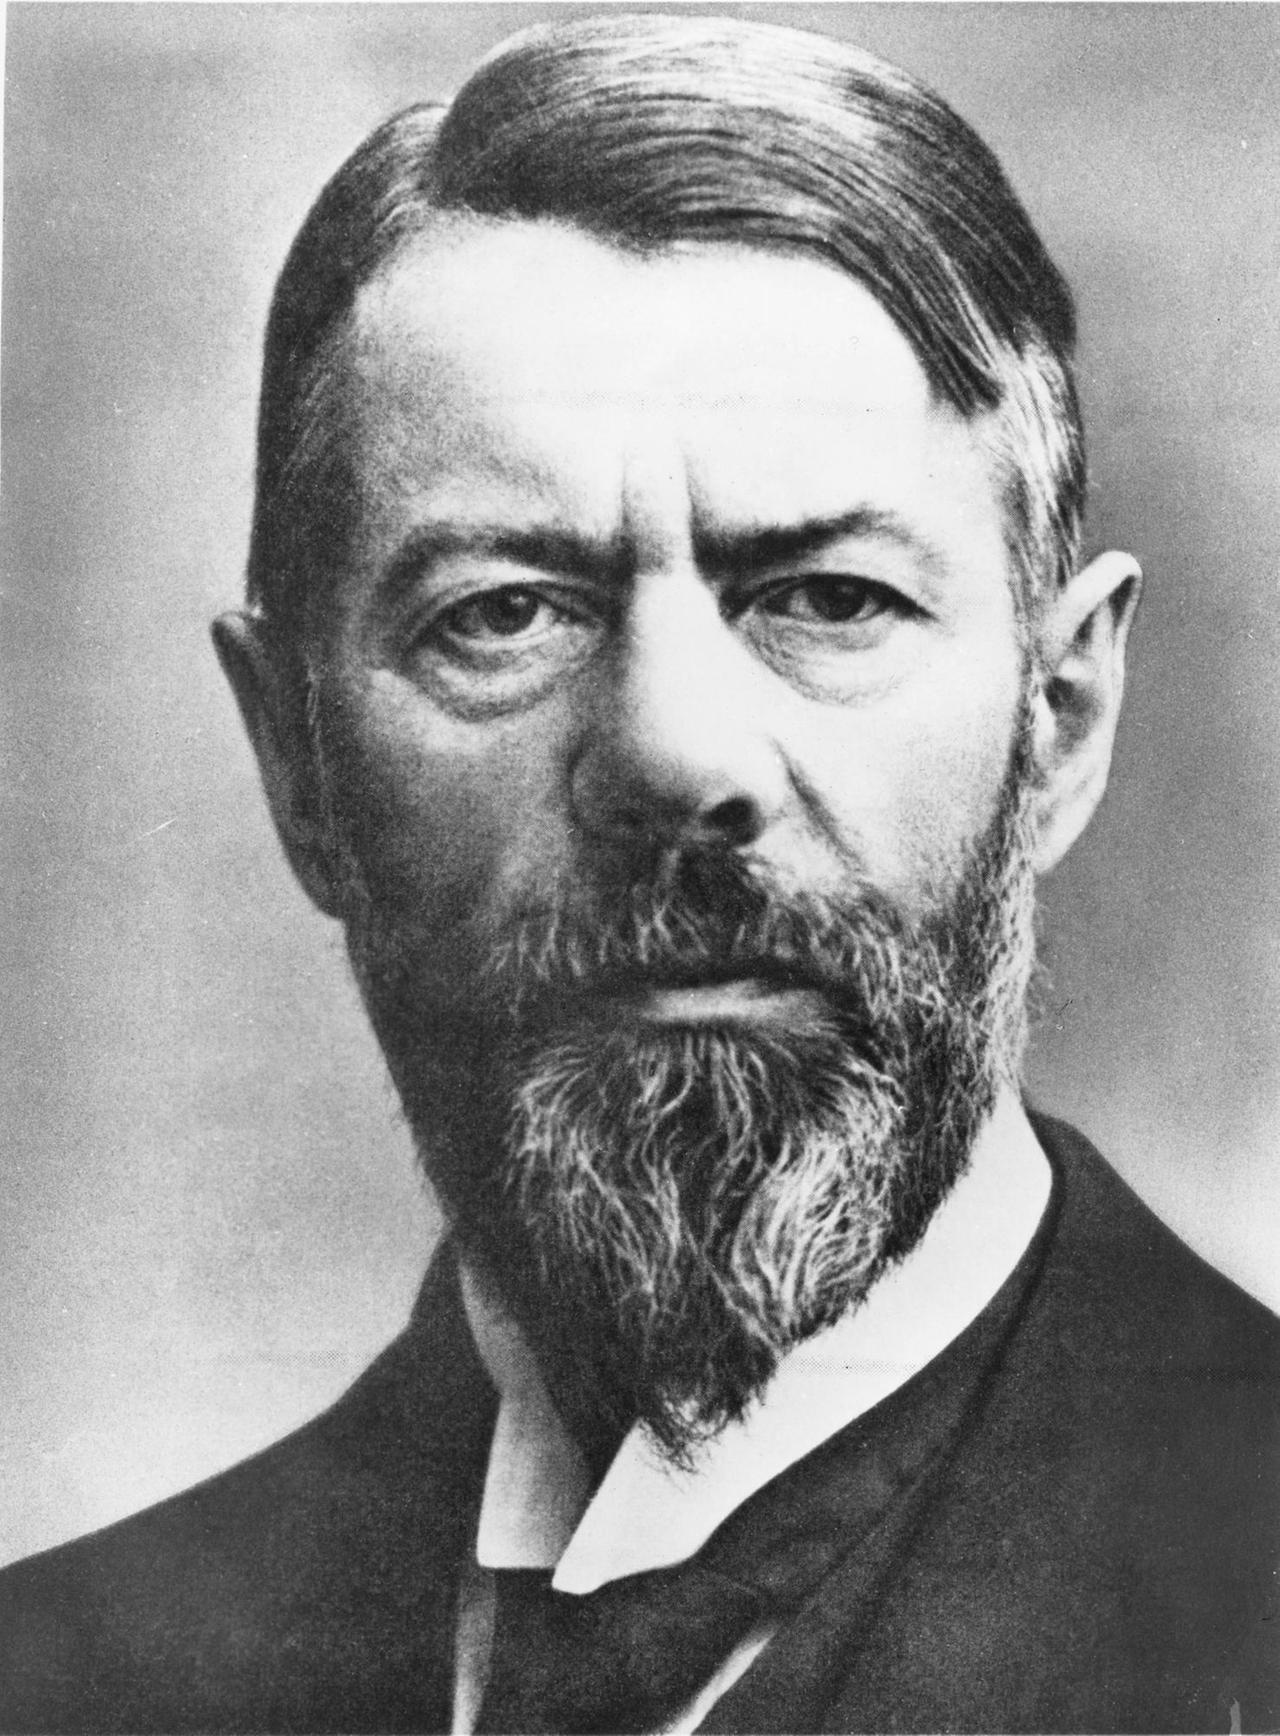 Feb. 15, 1917 - Heidelberg, Germany - Enemy of the squires was what the famous German political economist and sociologist MAX WEBER called himself, whose birthday comes round for the hundredth time on 21st April, 1964. Born in Erfurt, the son of a politician broke more and more with the national-liberal views of his parental home in the course of his research work on the social problem in Germany. Heidelberg Germany PUBLICATIONxINxGERxONLY - ZUMAk09 Feb 15 1917 Heidelberg Germany Enemy of The Squires what What The Famous German Political Economist and sociologist Max Weber called himself whose Birthday COMES Round for The hundredth Time ON 21st April 1964 Born in Erfurt The Sun of a politician Broke More and More With The National Liberal Views of His Parental Home in The Course of His Research Work ON The Social Problem in Germany Heidelberg Germany PUBLICATIONxINxGERxONLY ZUMAk09